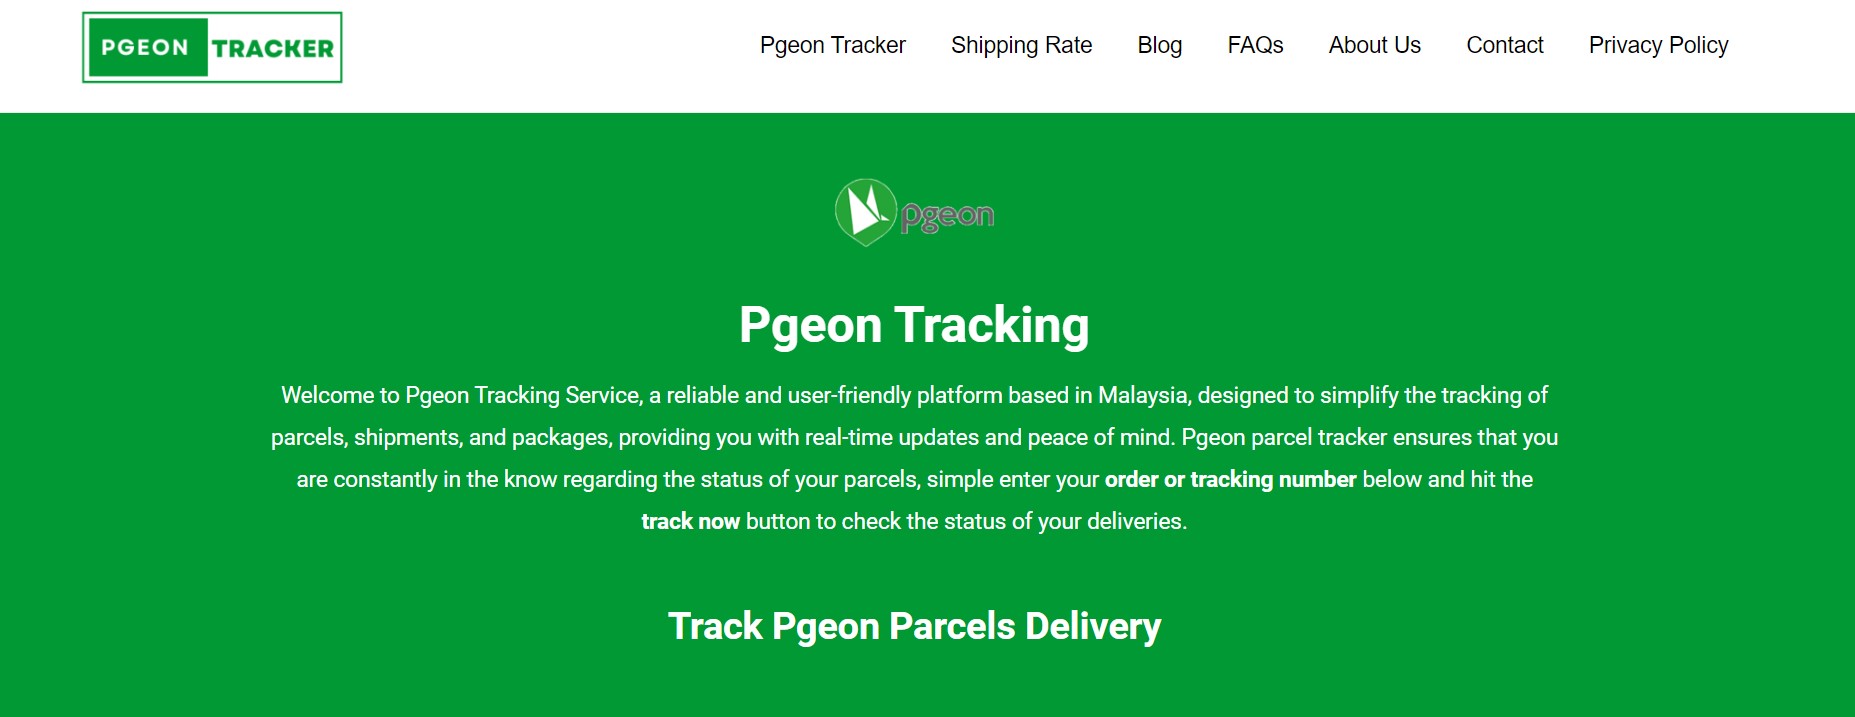 Pgeon Tracking